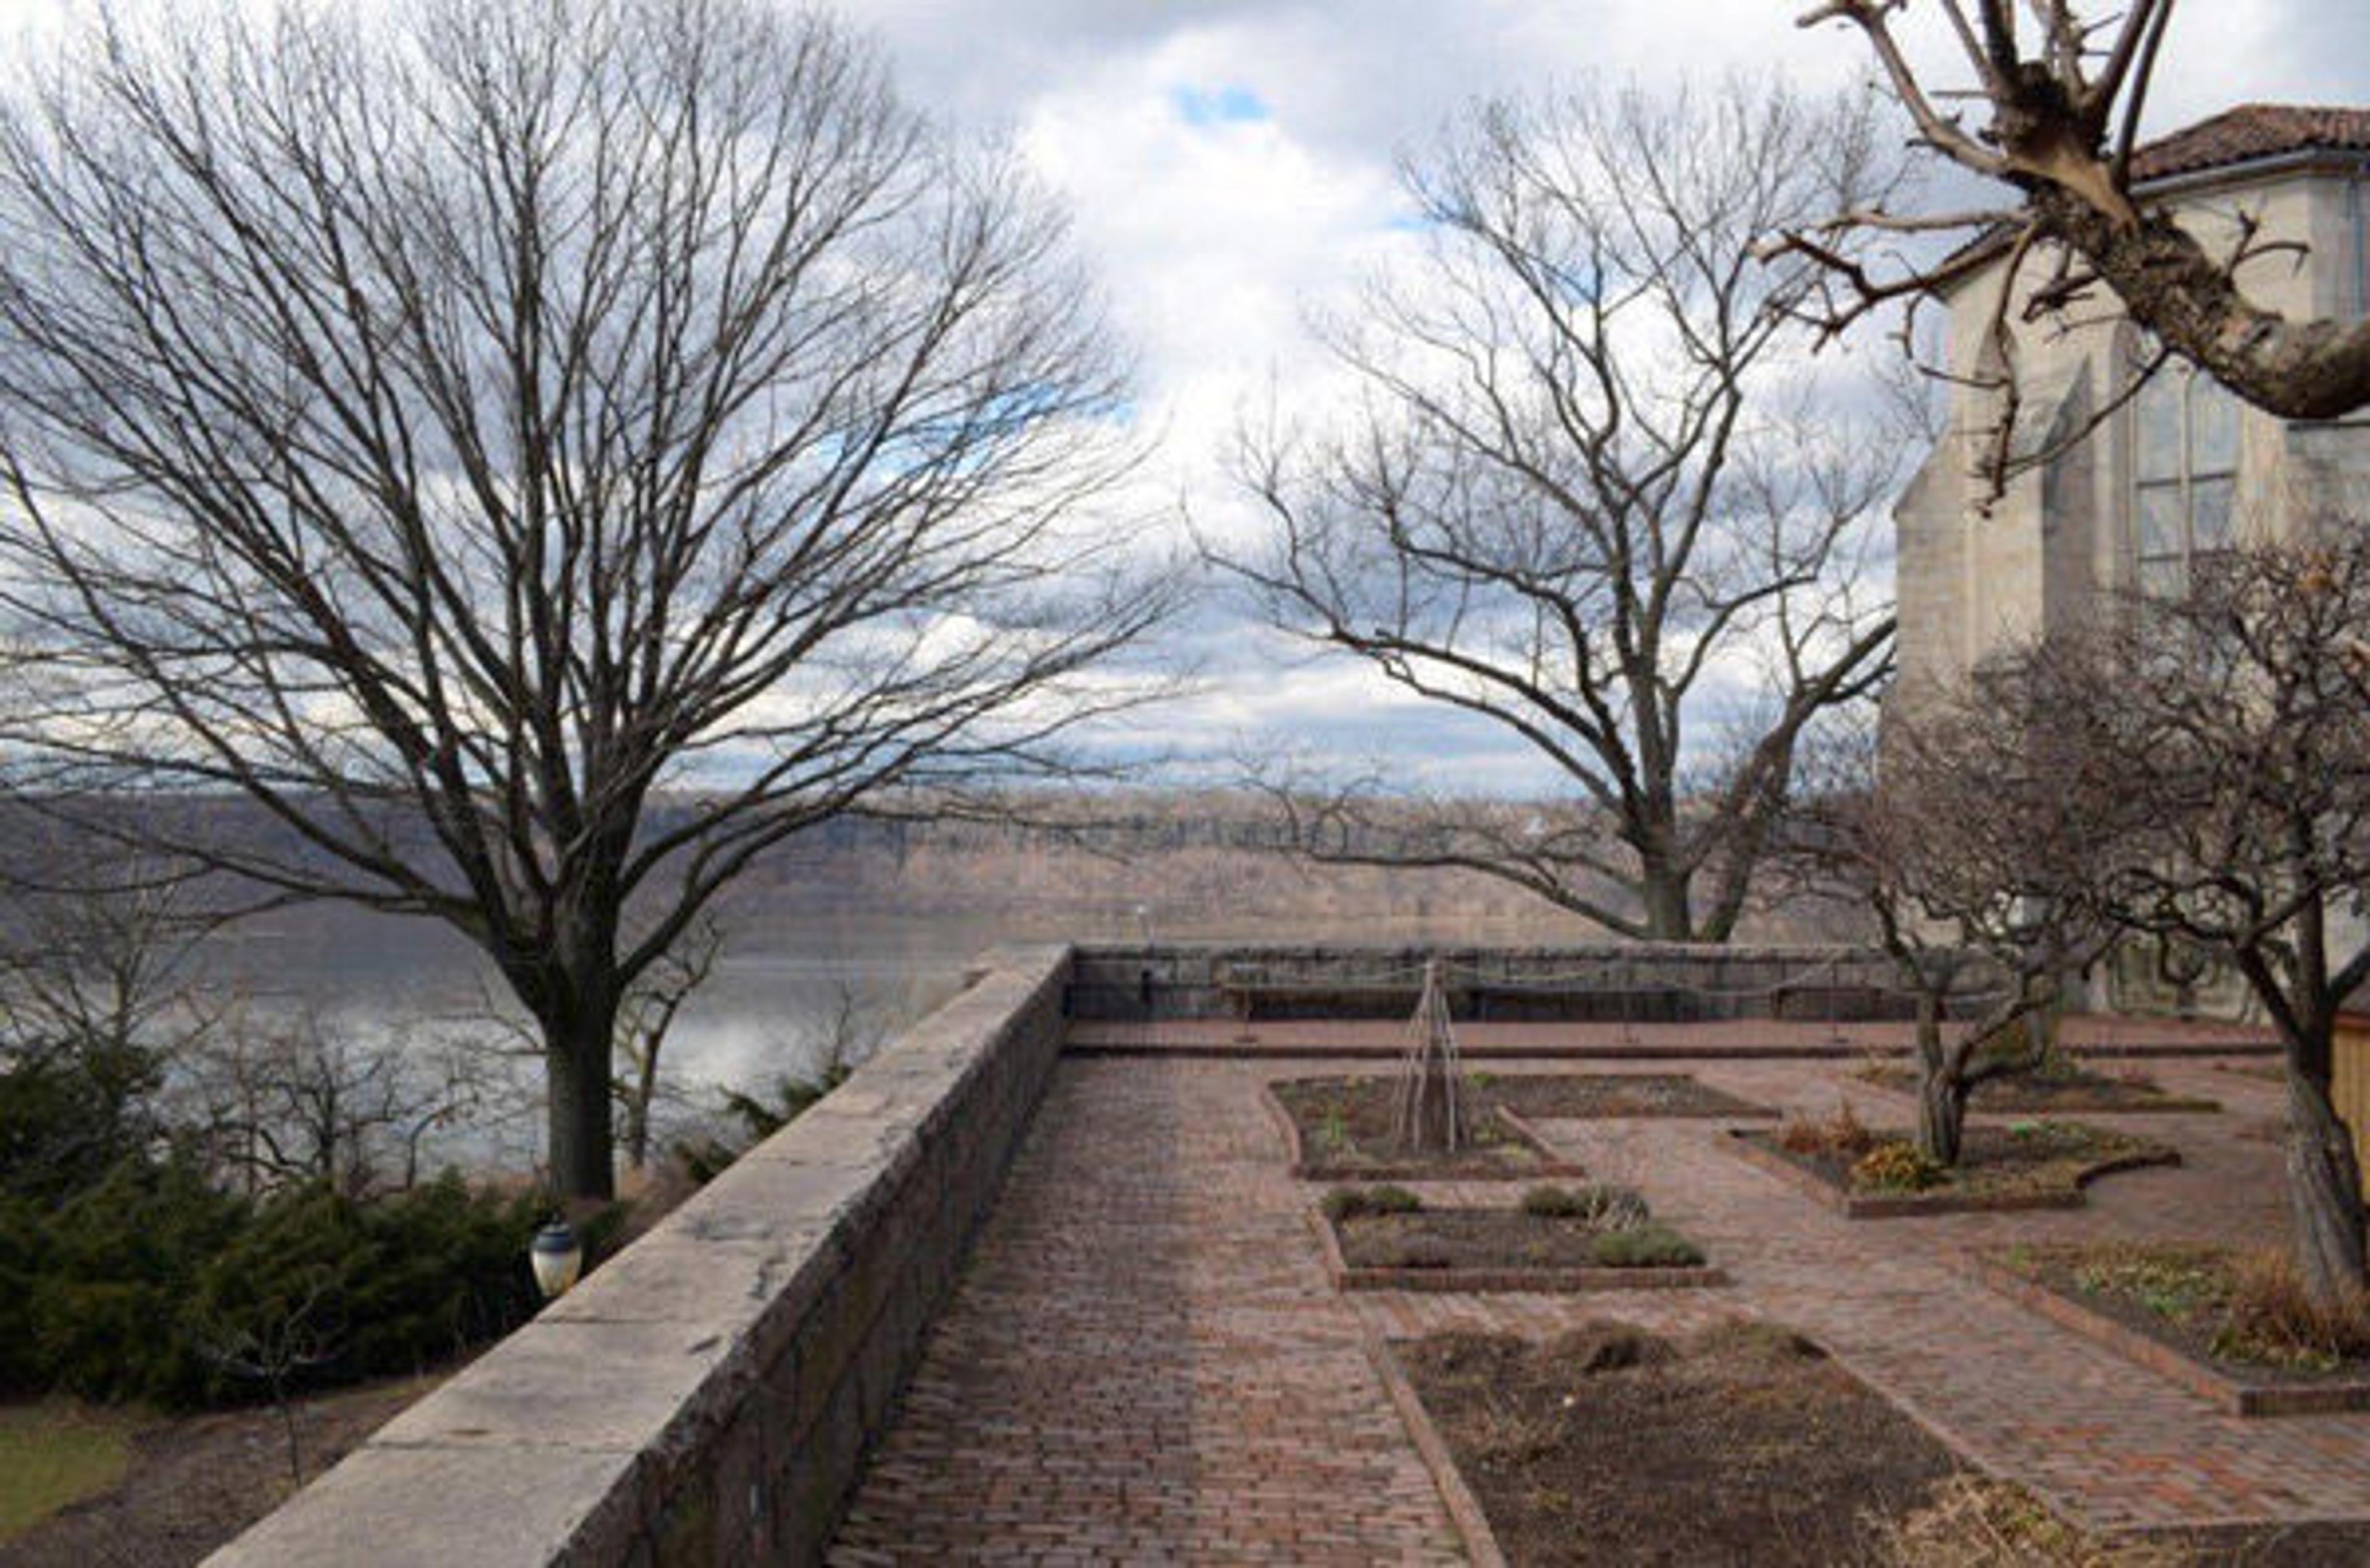 The Palisades from Bonnefont Garden at The Cloisters